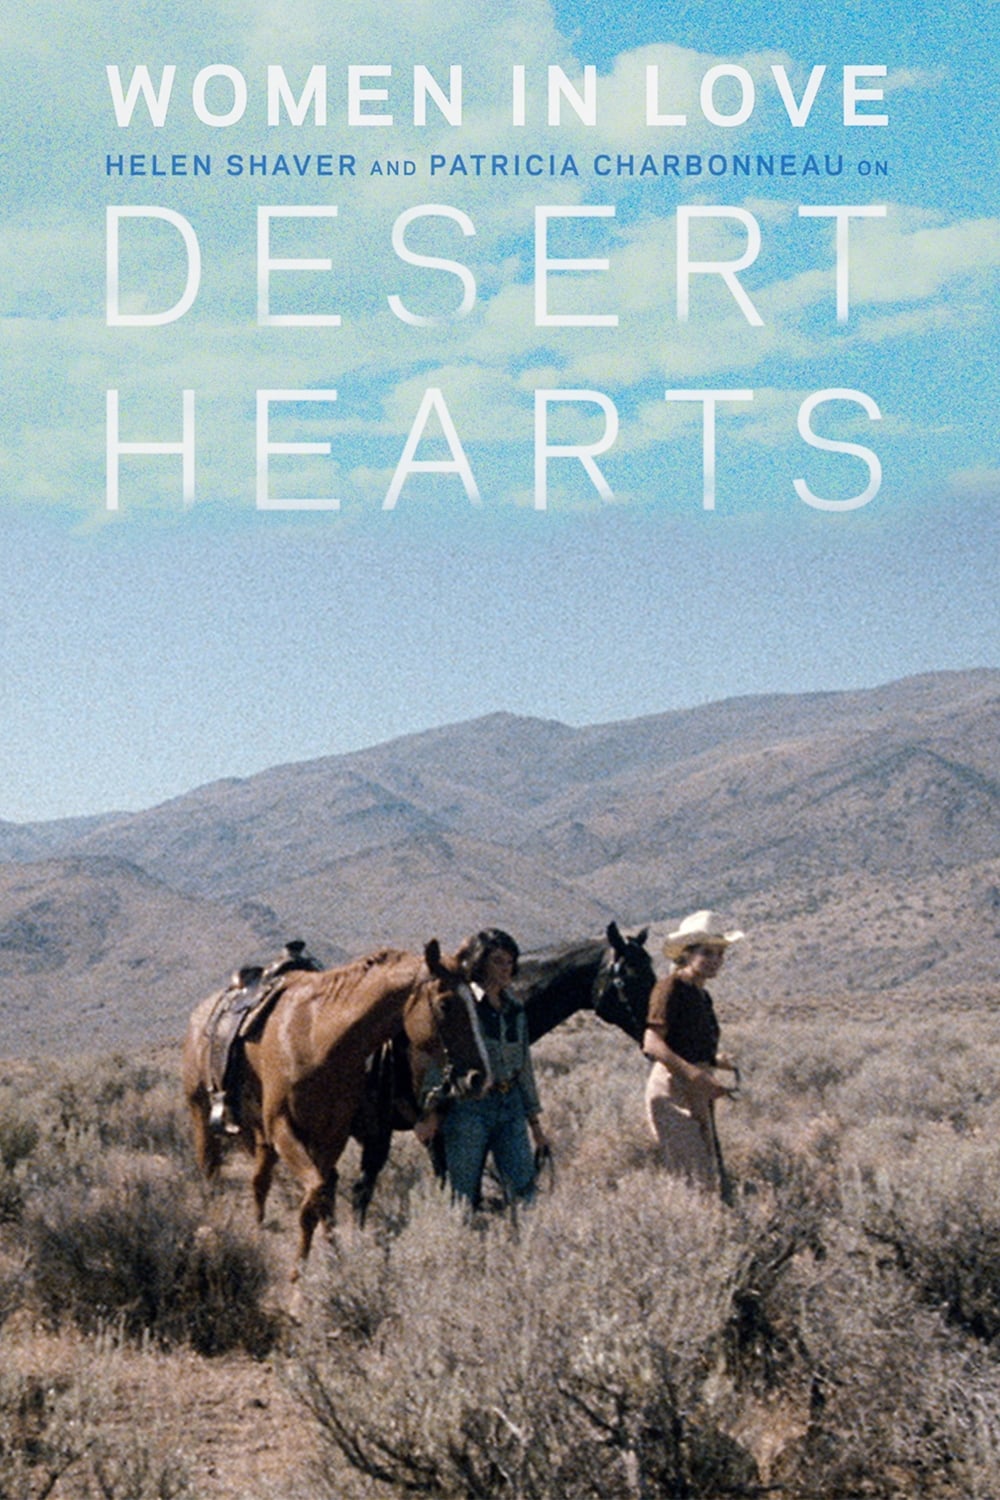 Women in Love: Helen Shaver and Patricia Charbonneau on Desert Hearts (2017)